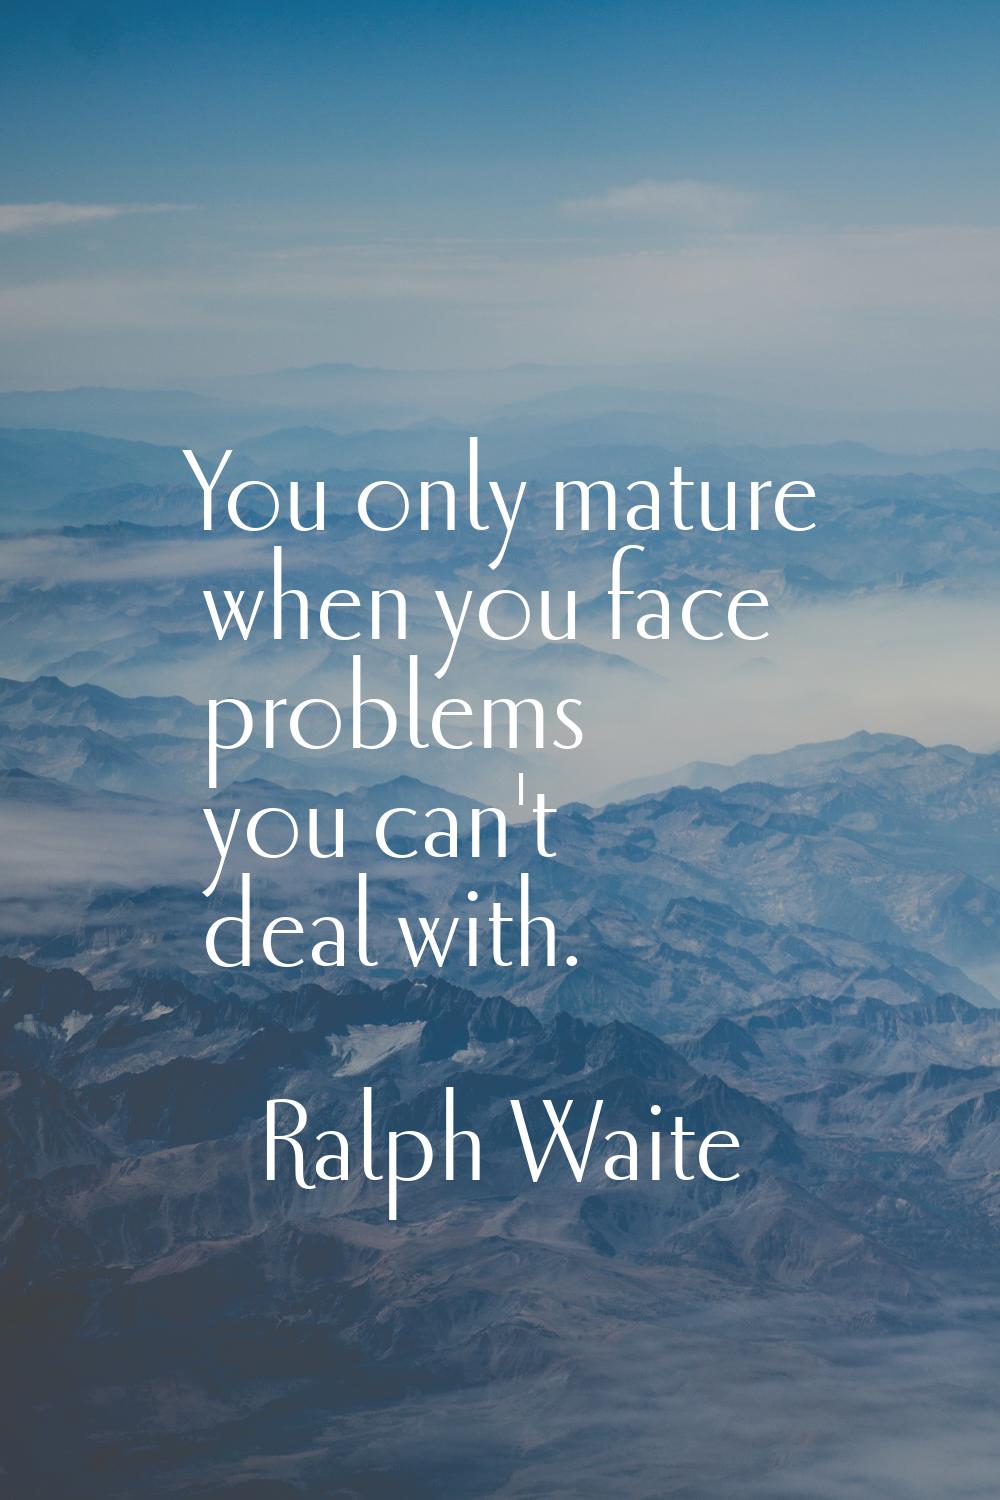 You only mature when you face problems you can't deal with.